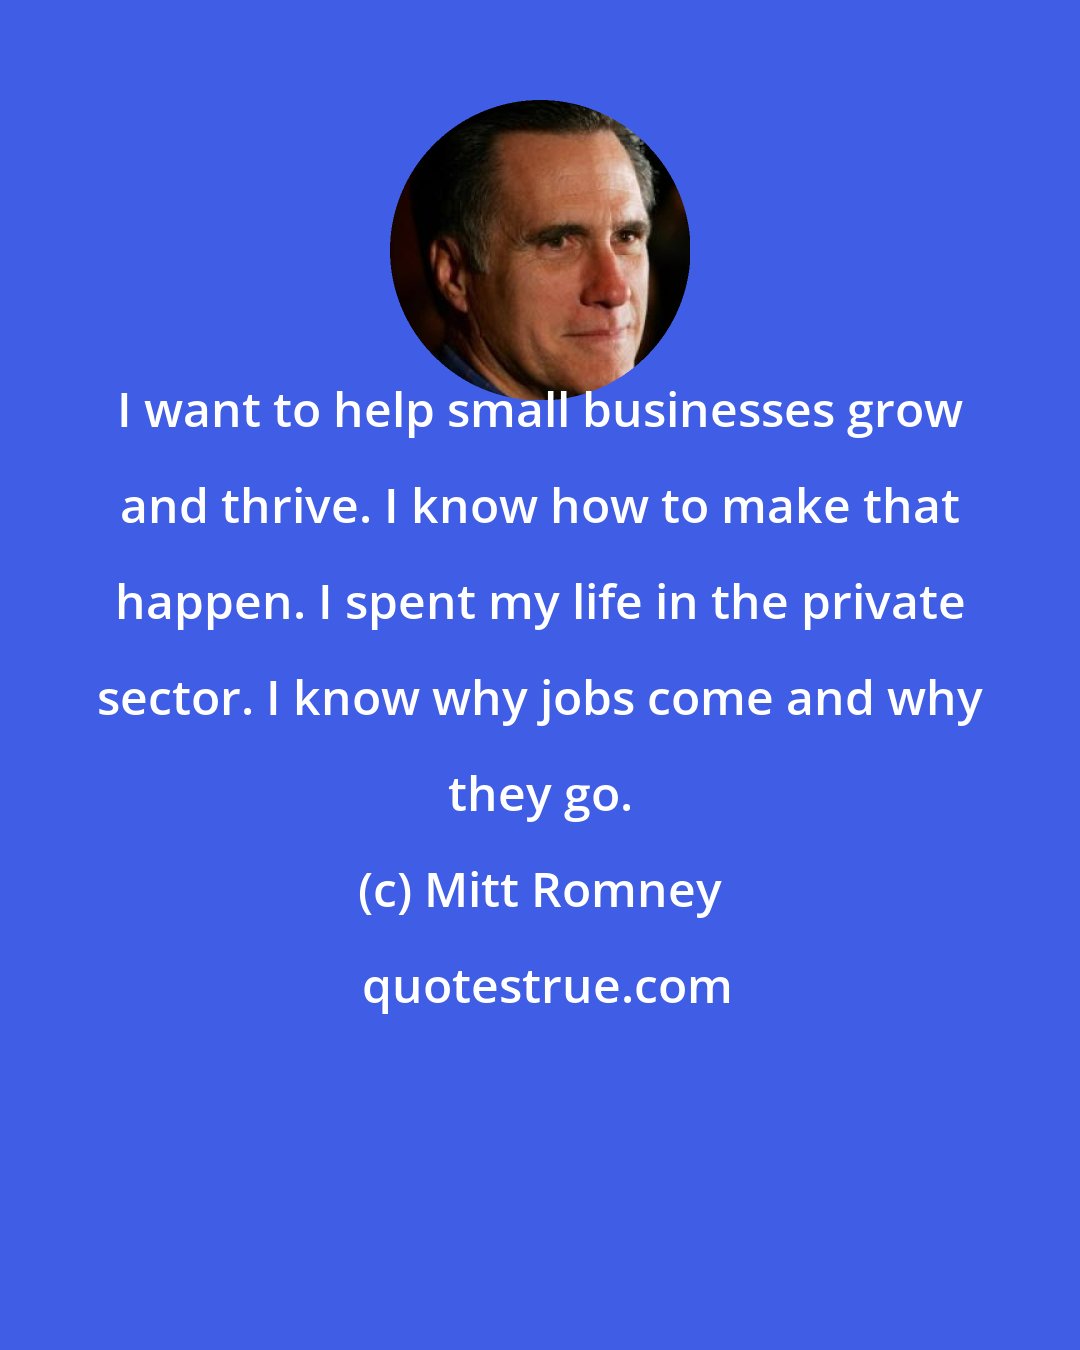 Mitt Romney: I want to help small businesses grow and thrive. I know how to make that happen. I spent my life in the private sector. I know why jobs come and why they go.